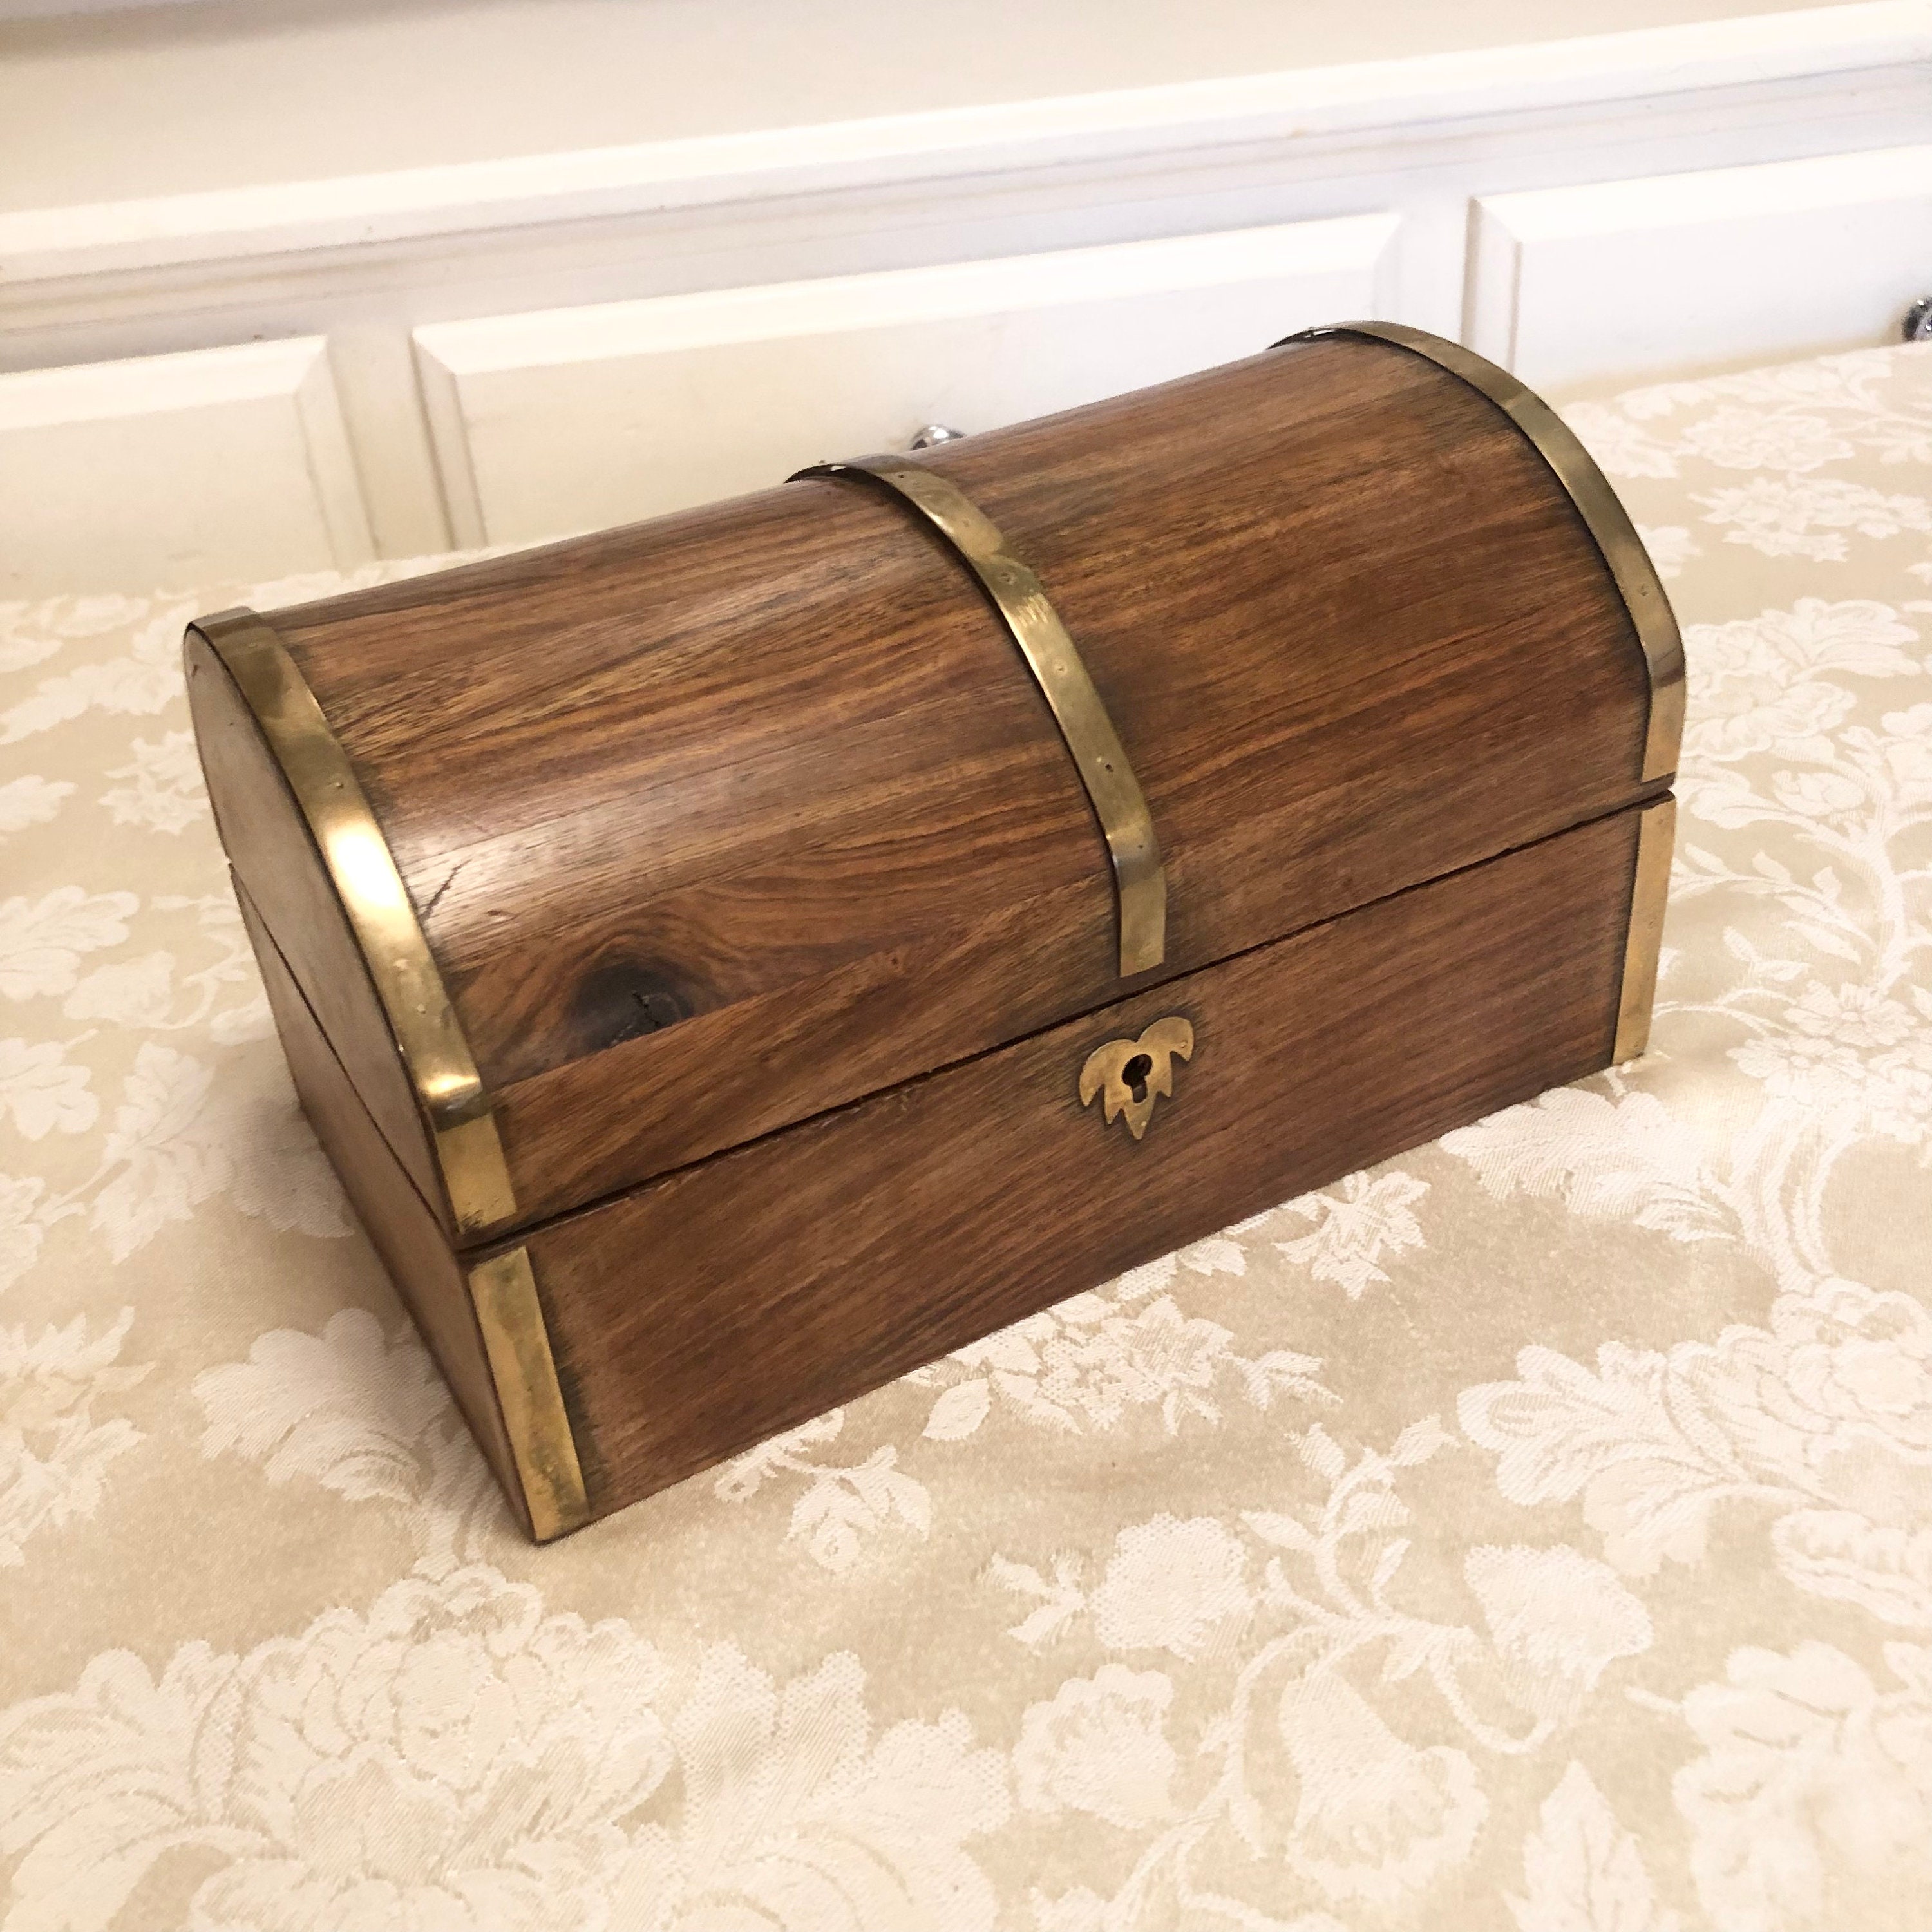 Treasure chest style brass inlaid ships wheel wooden box 